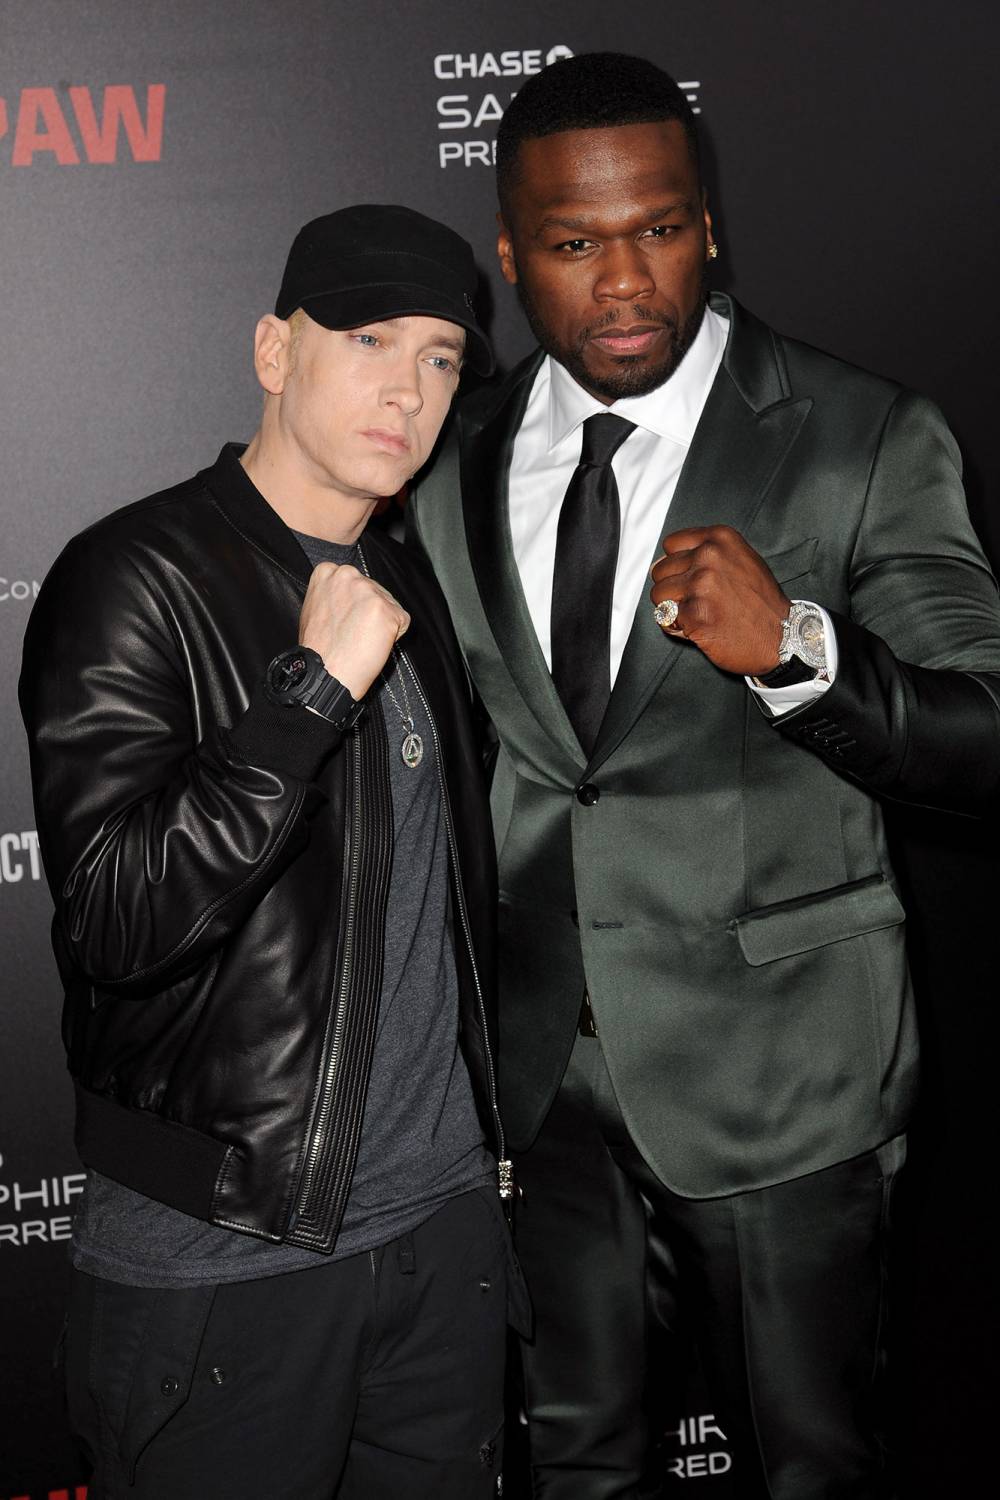 50 Cent Threatens to Kick Punk Nick Cannon’s Ass Over Eminem Feud